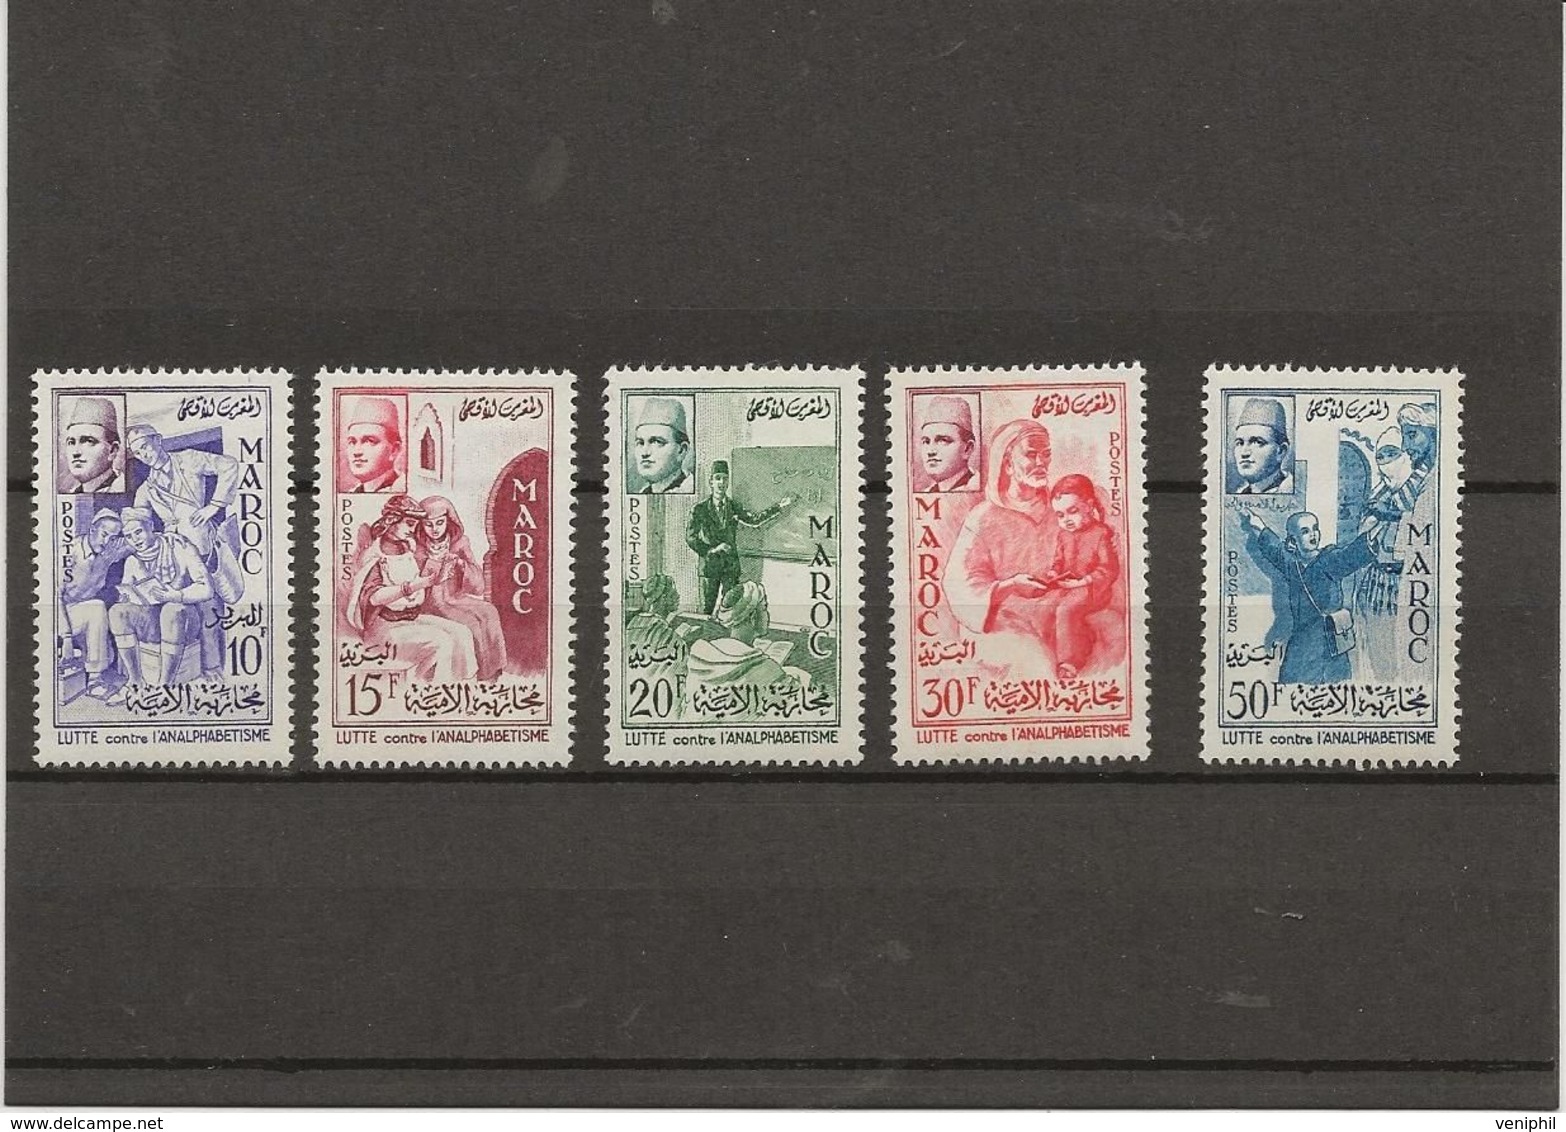 MAROC - TIMBRES N° 369 A 373 NEUF INFIME CHARNIERE -ANNEE 1956 -COTE : 27 € - Neufs